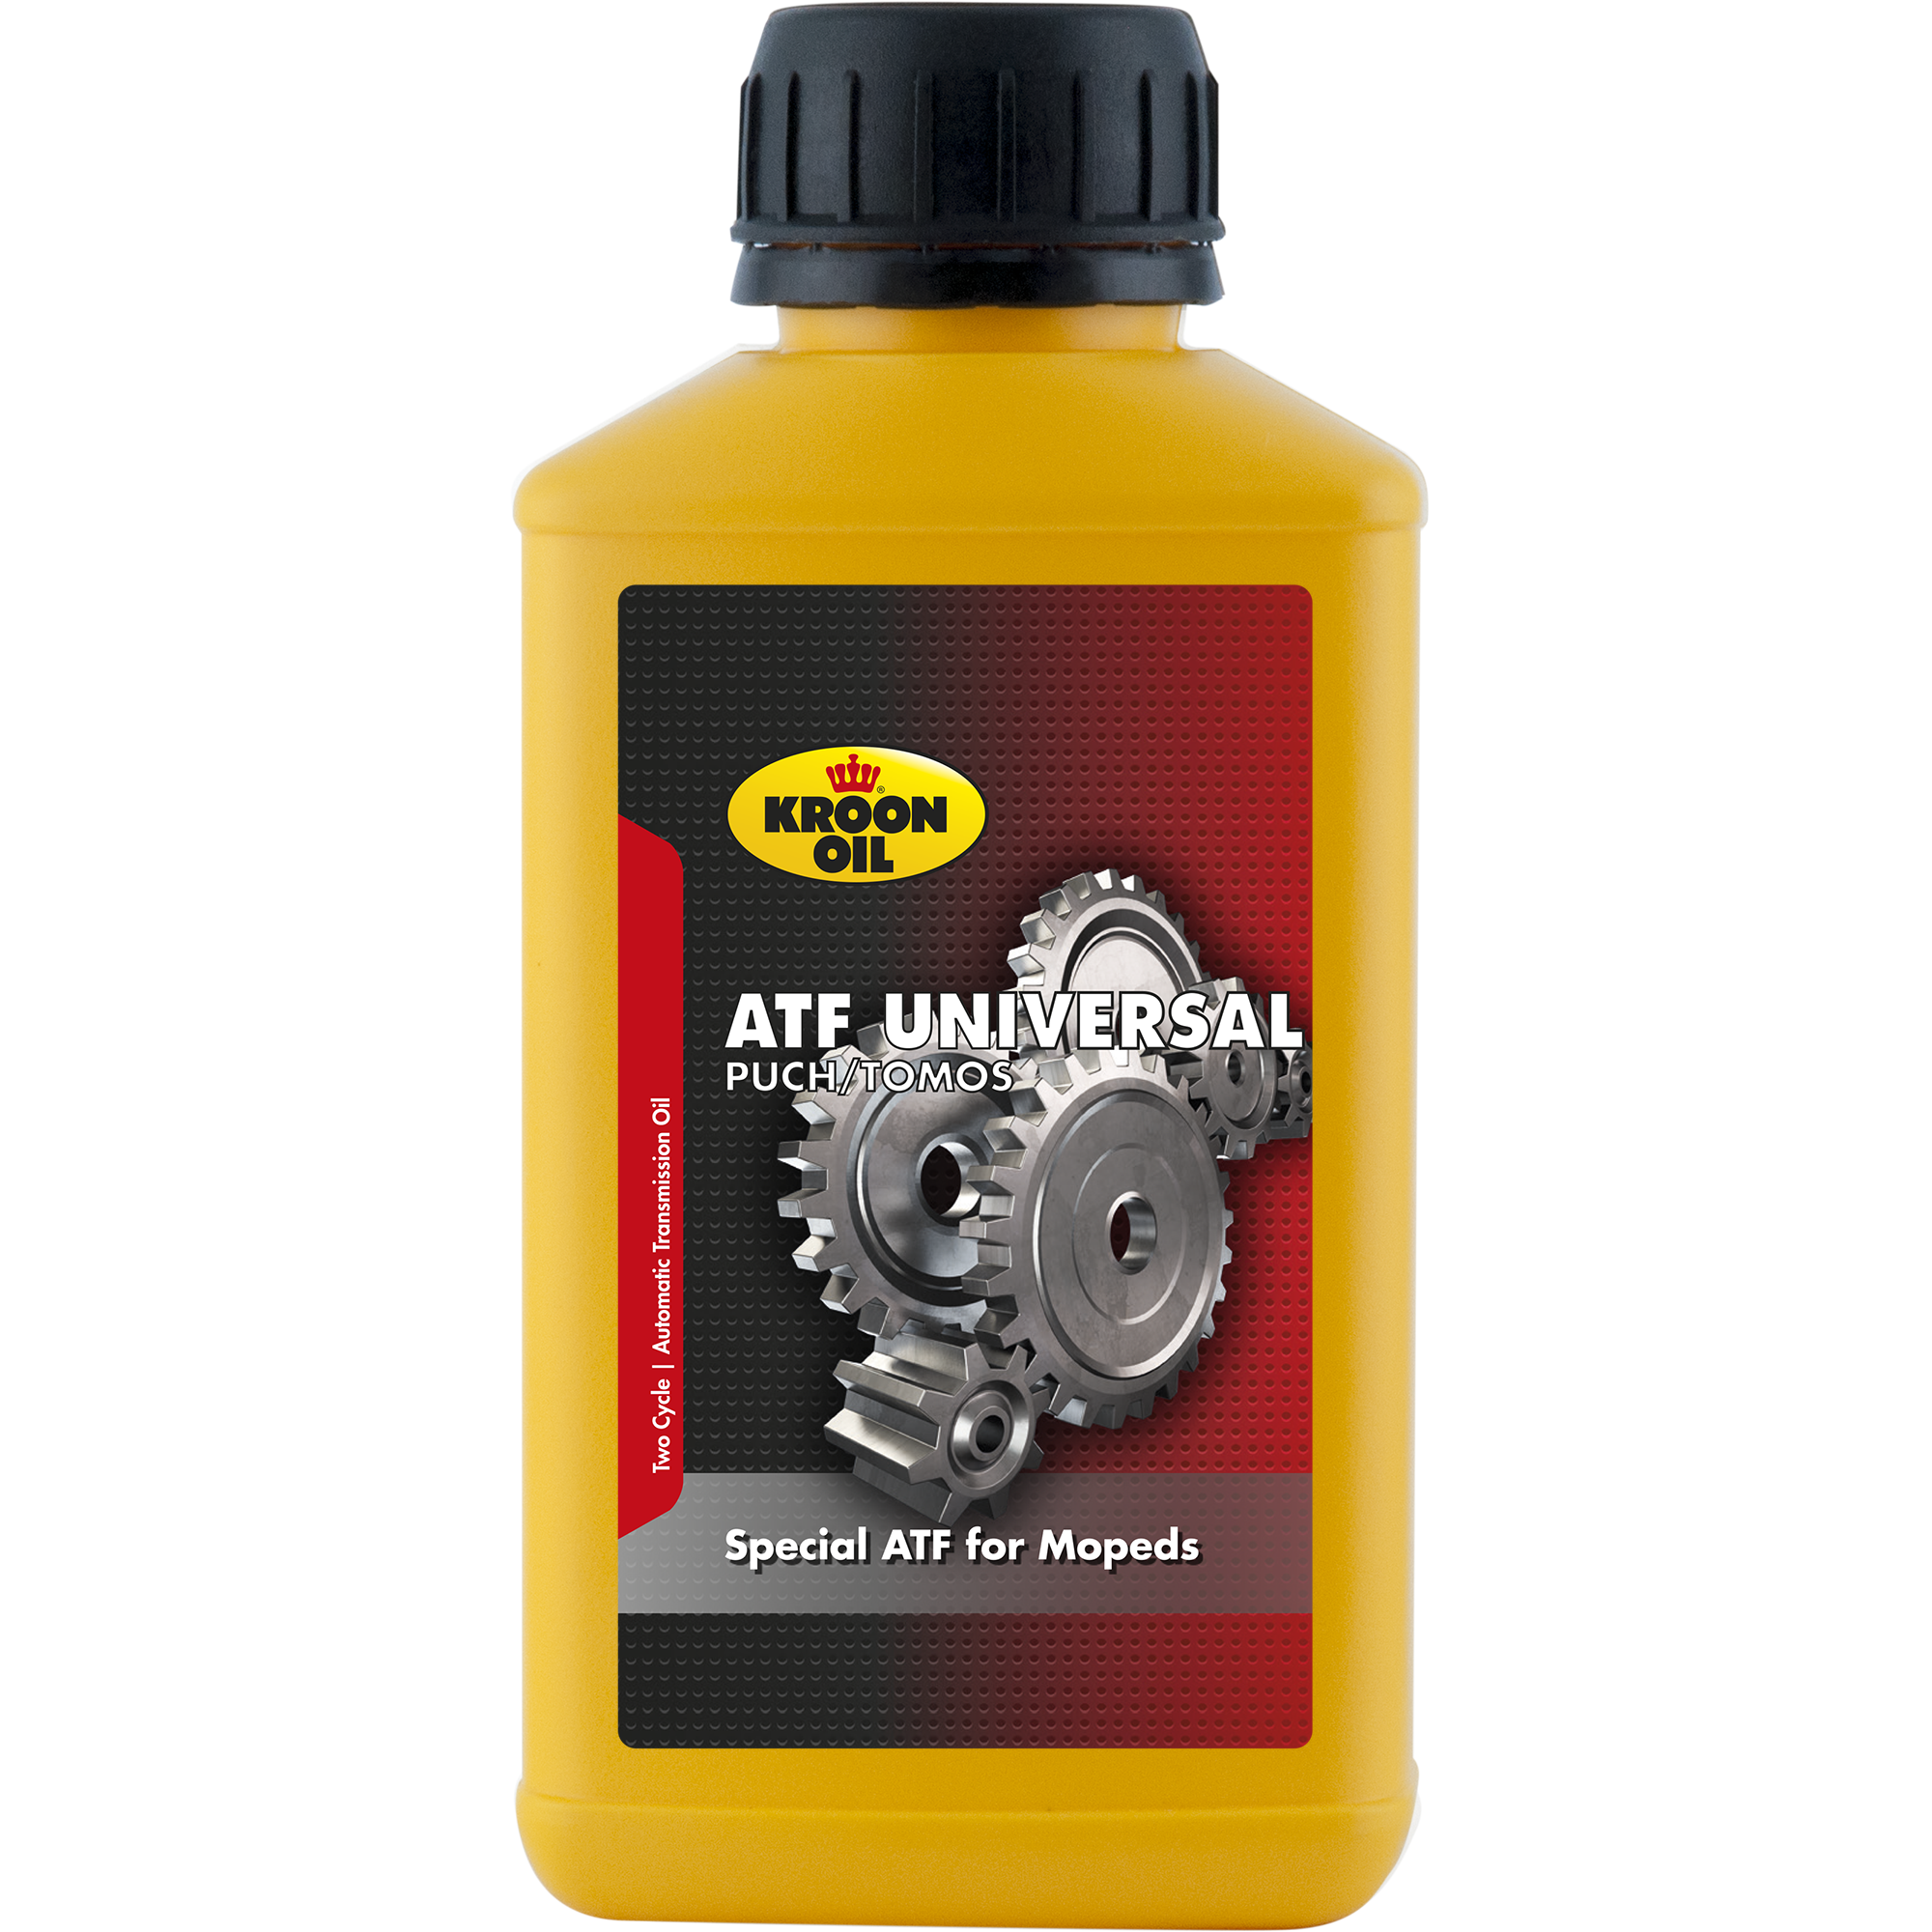 Kroon-Oil ATF Universal Puch/Tomos, 250 ml